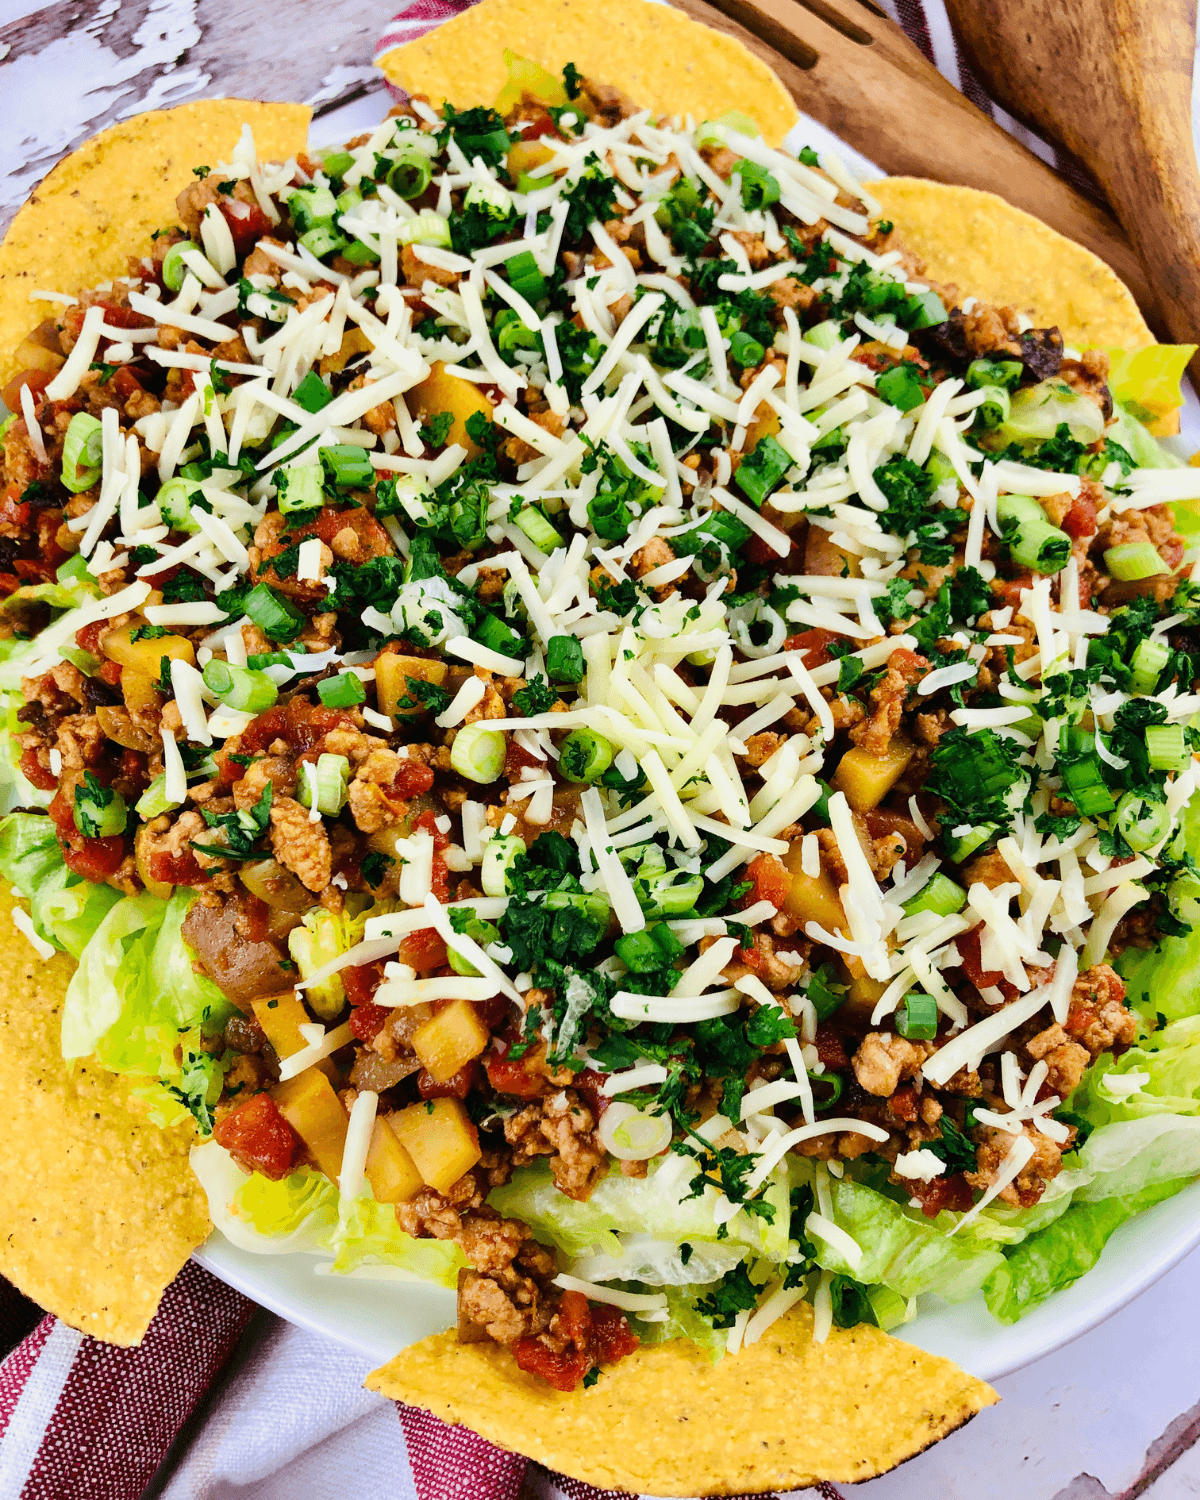 A shot of the Chicken  Picadillo Taco salad from the top, highlighting all the ingredients.